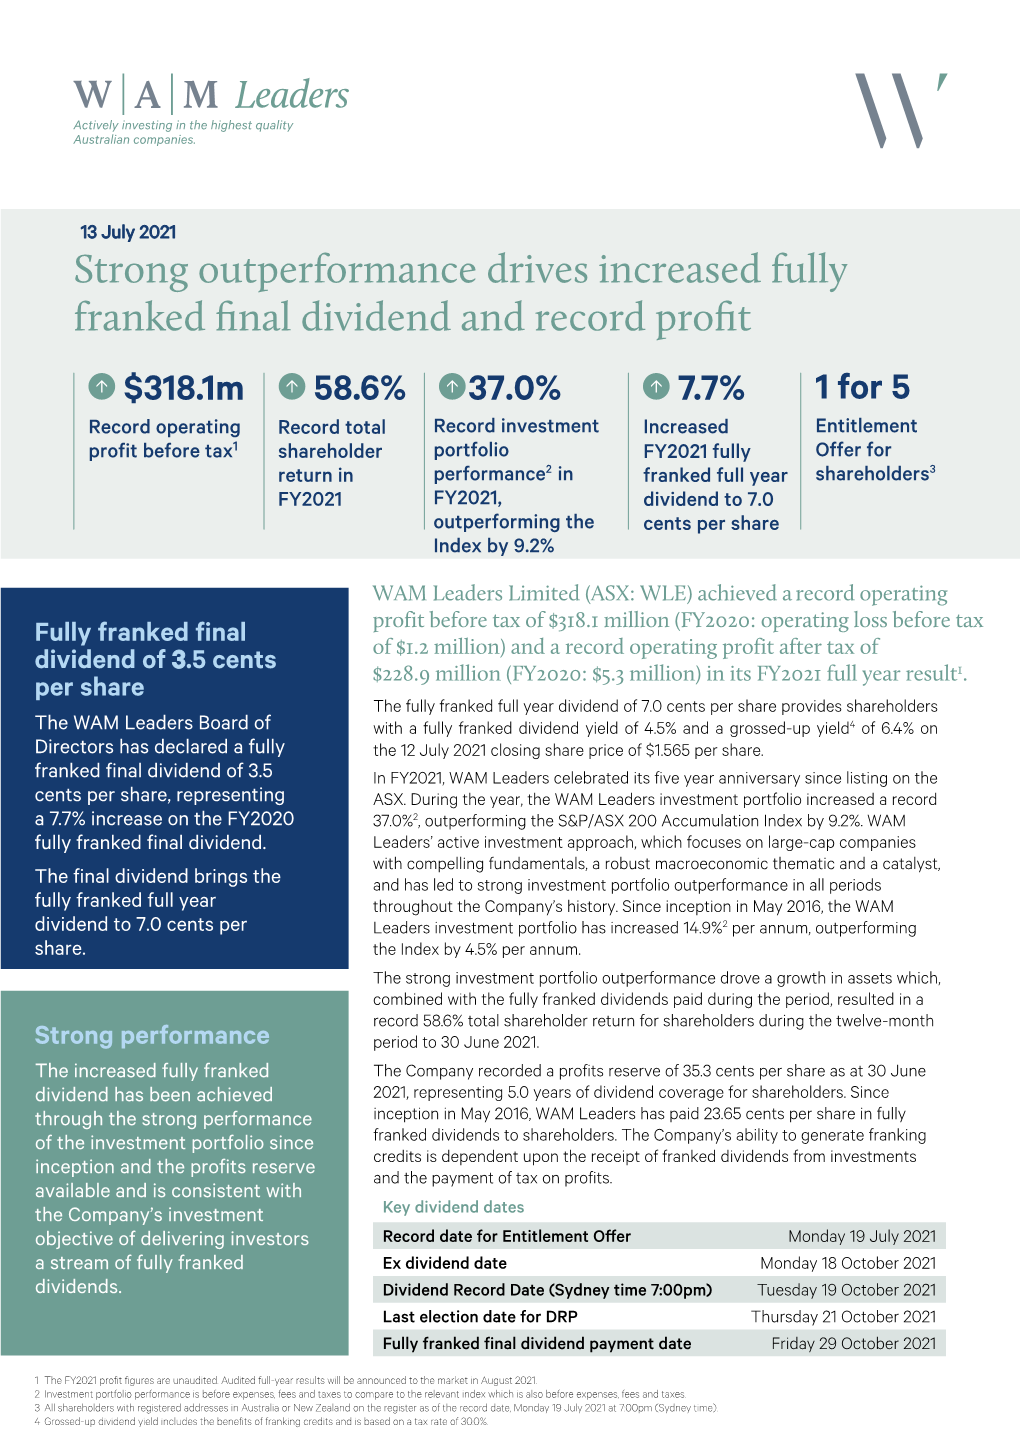 Strong Outperformance Drives Increased Fully Franked Final Dividend and Record Profit